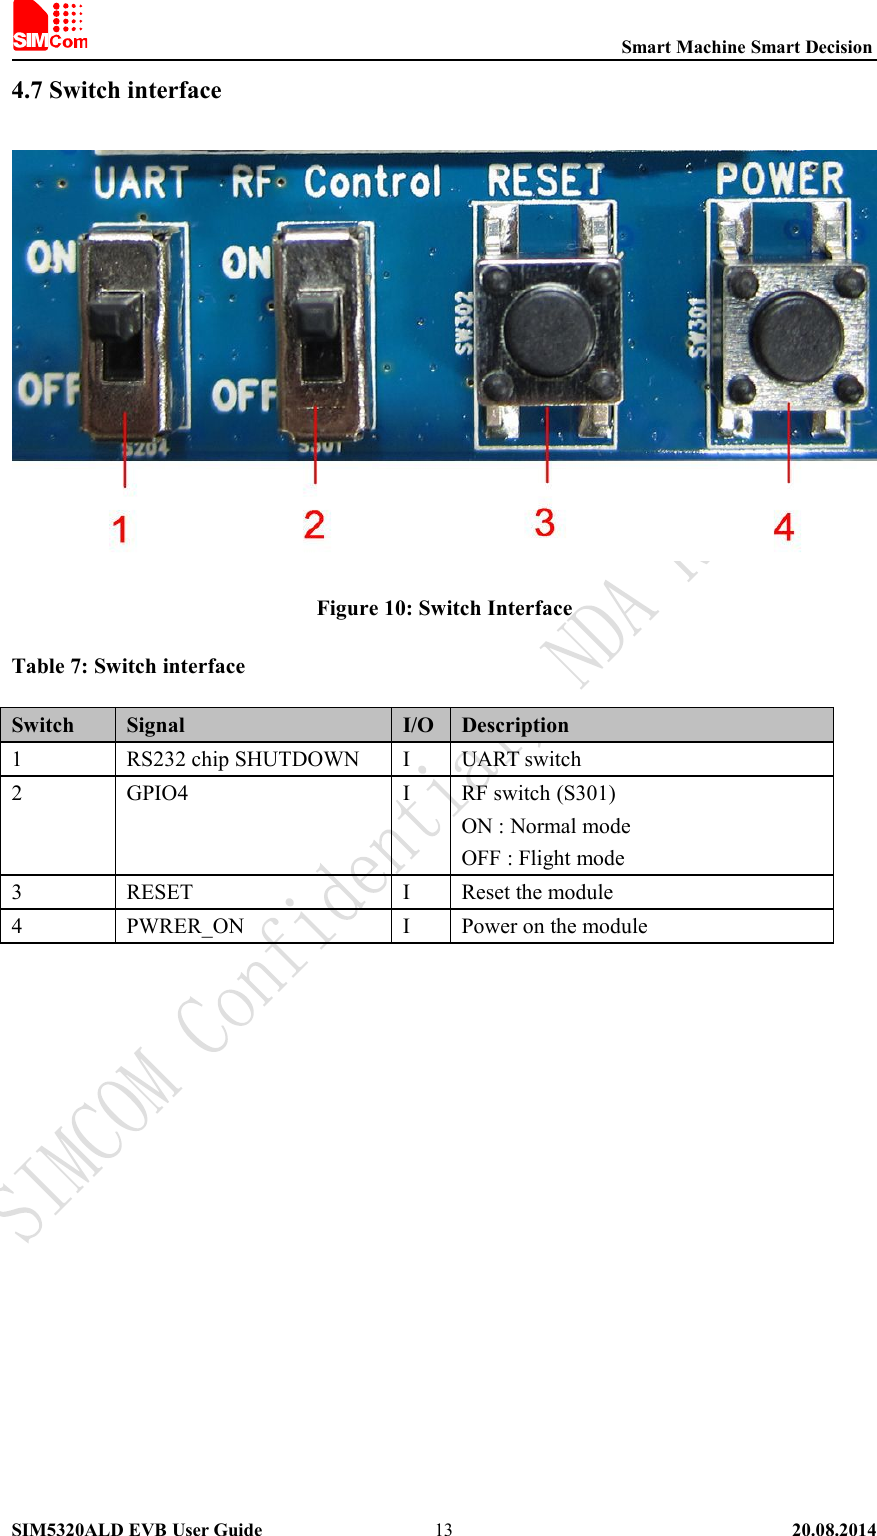 Smart Machine Smart DecisionSIM5320ALD EVB User Guide 20.08.2014134.7 Switch interfaceFigure 10: Switch InterfaceTable 7: Switch interfaceSwitch Signal I/O Description1 RS232 chip SHUTDOWN I UART switch2 GPIO4 I RF switch (S301)ON : Normal modeOFF : Flight mode3 RESET I Reset the module4 PWRER_ON I Power on the module